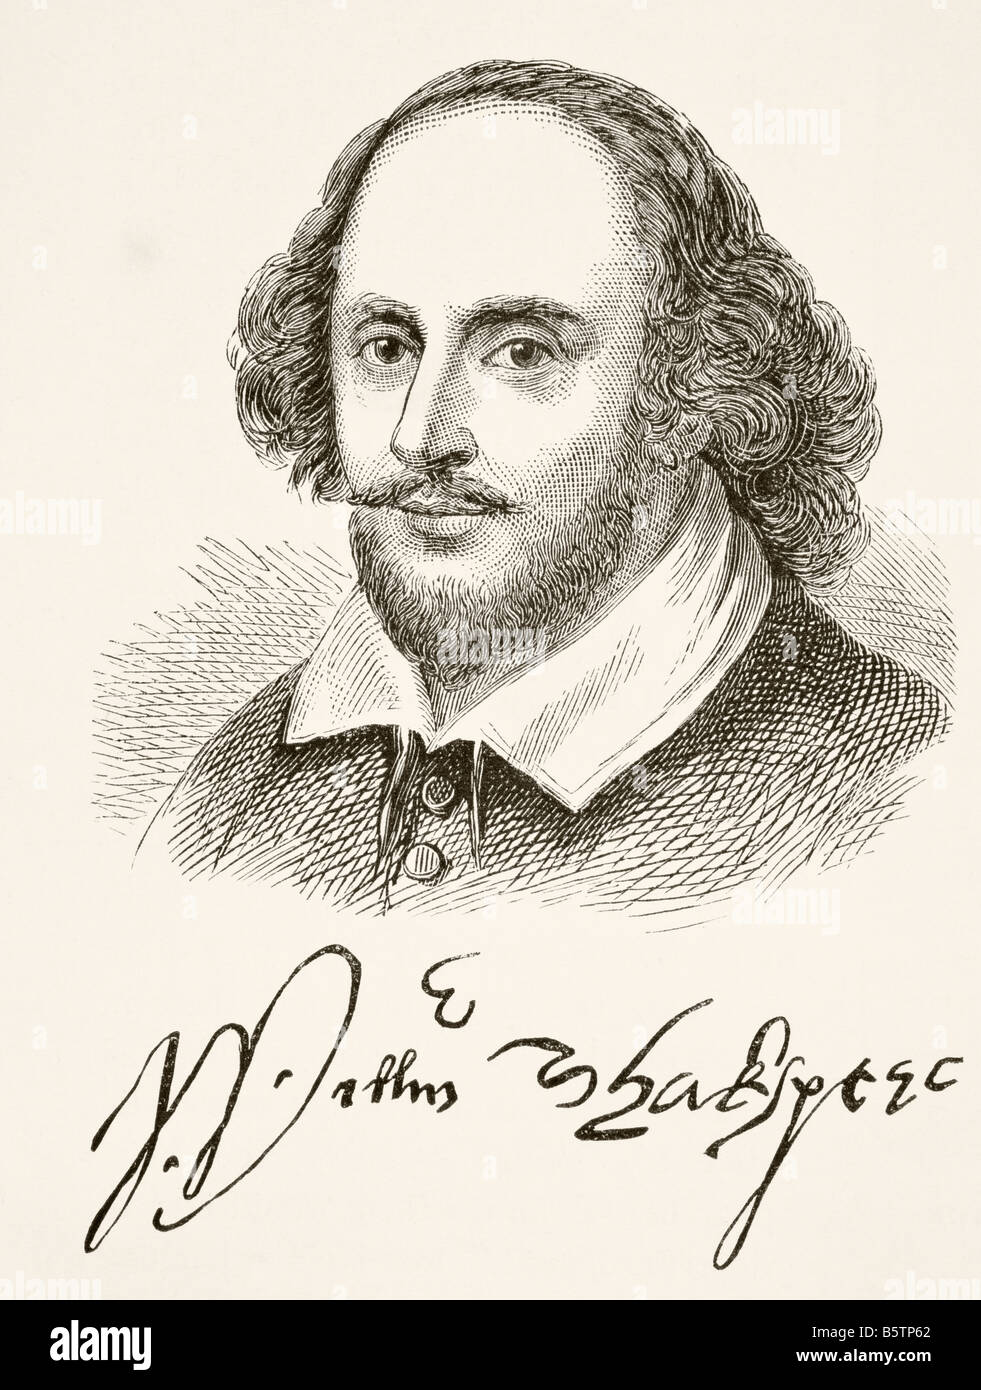 William Shakespeare, 1564 - 1616. English poet, playwright, dramatist and actor.  Portrait and signature. Stock Photo